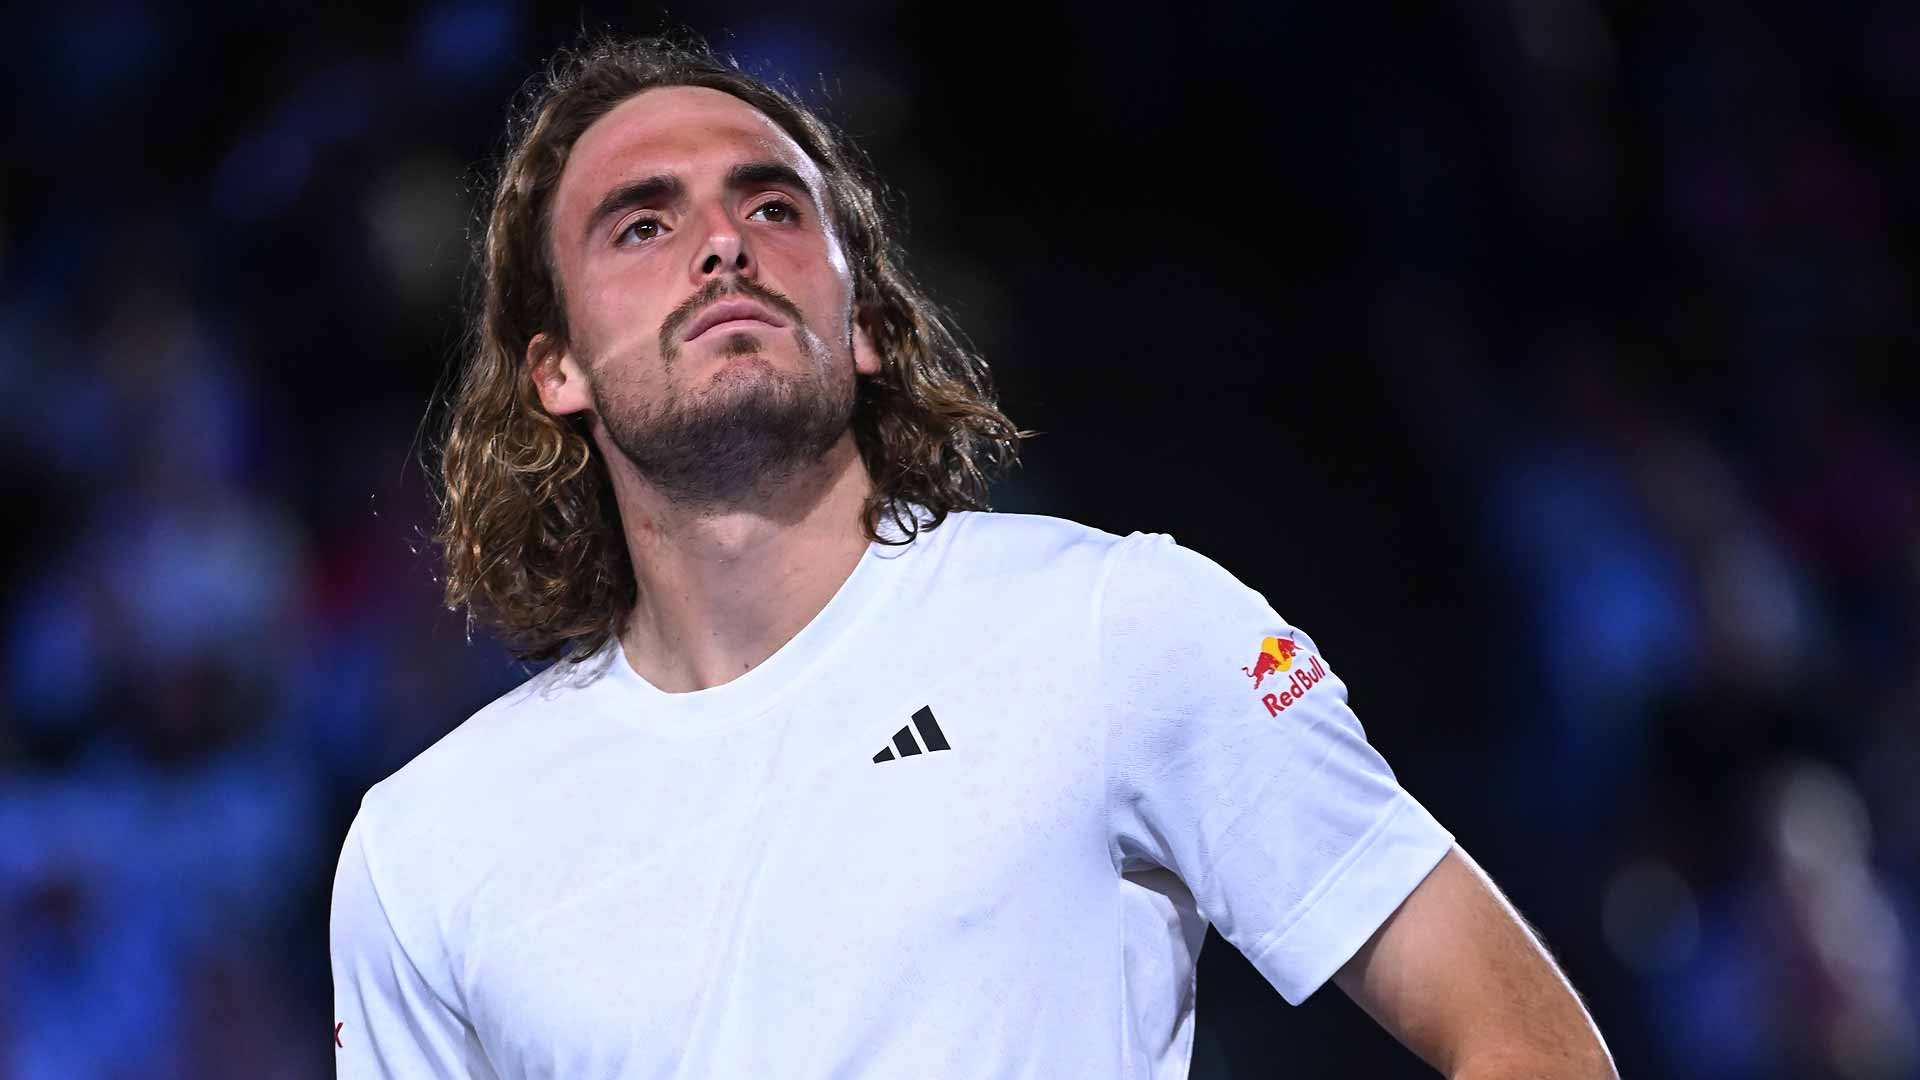 Stefanos Tsitsipas reached the final at this year's Australian Open.